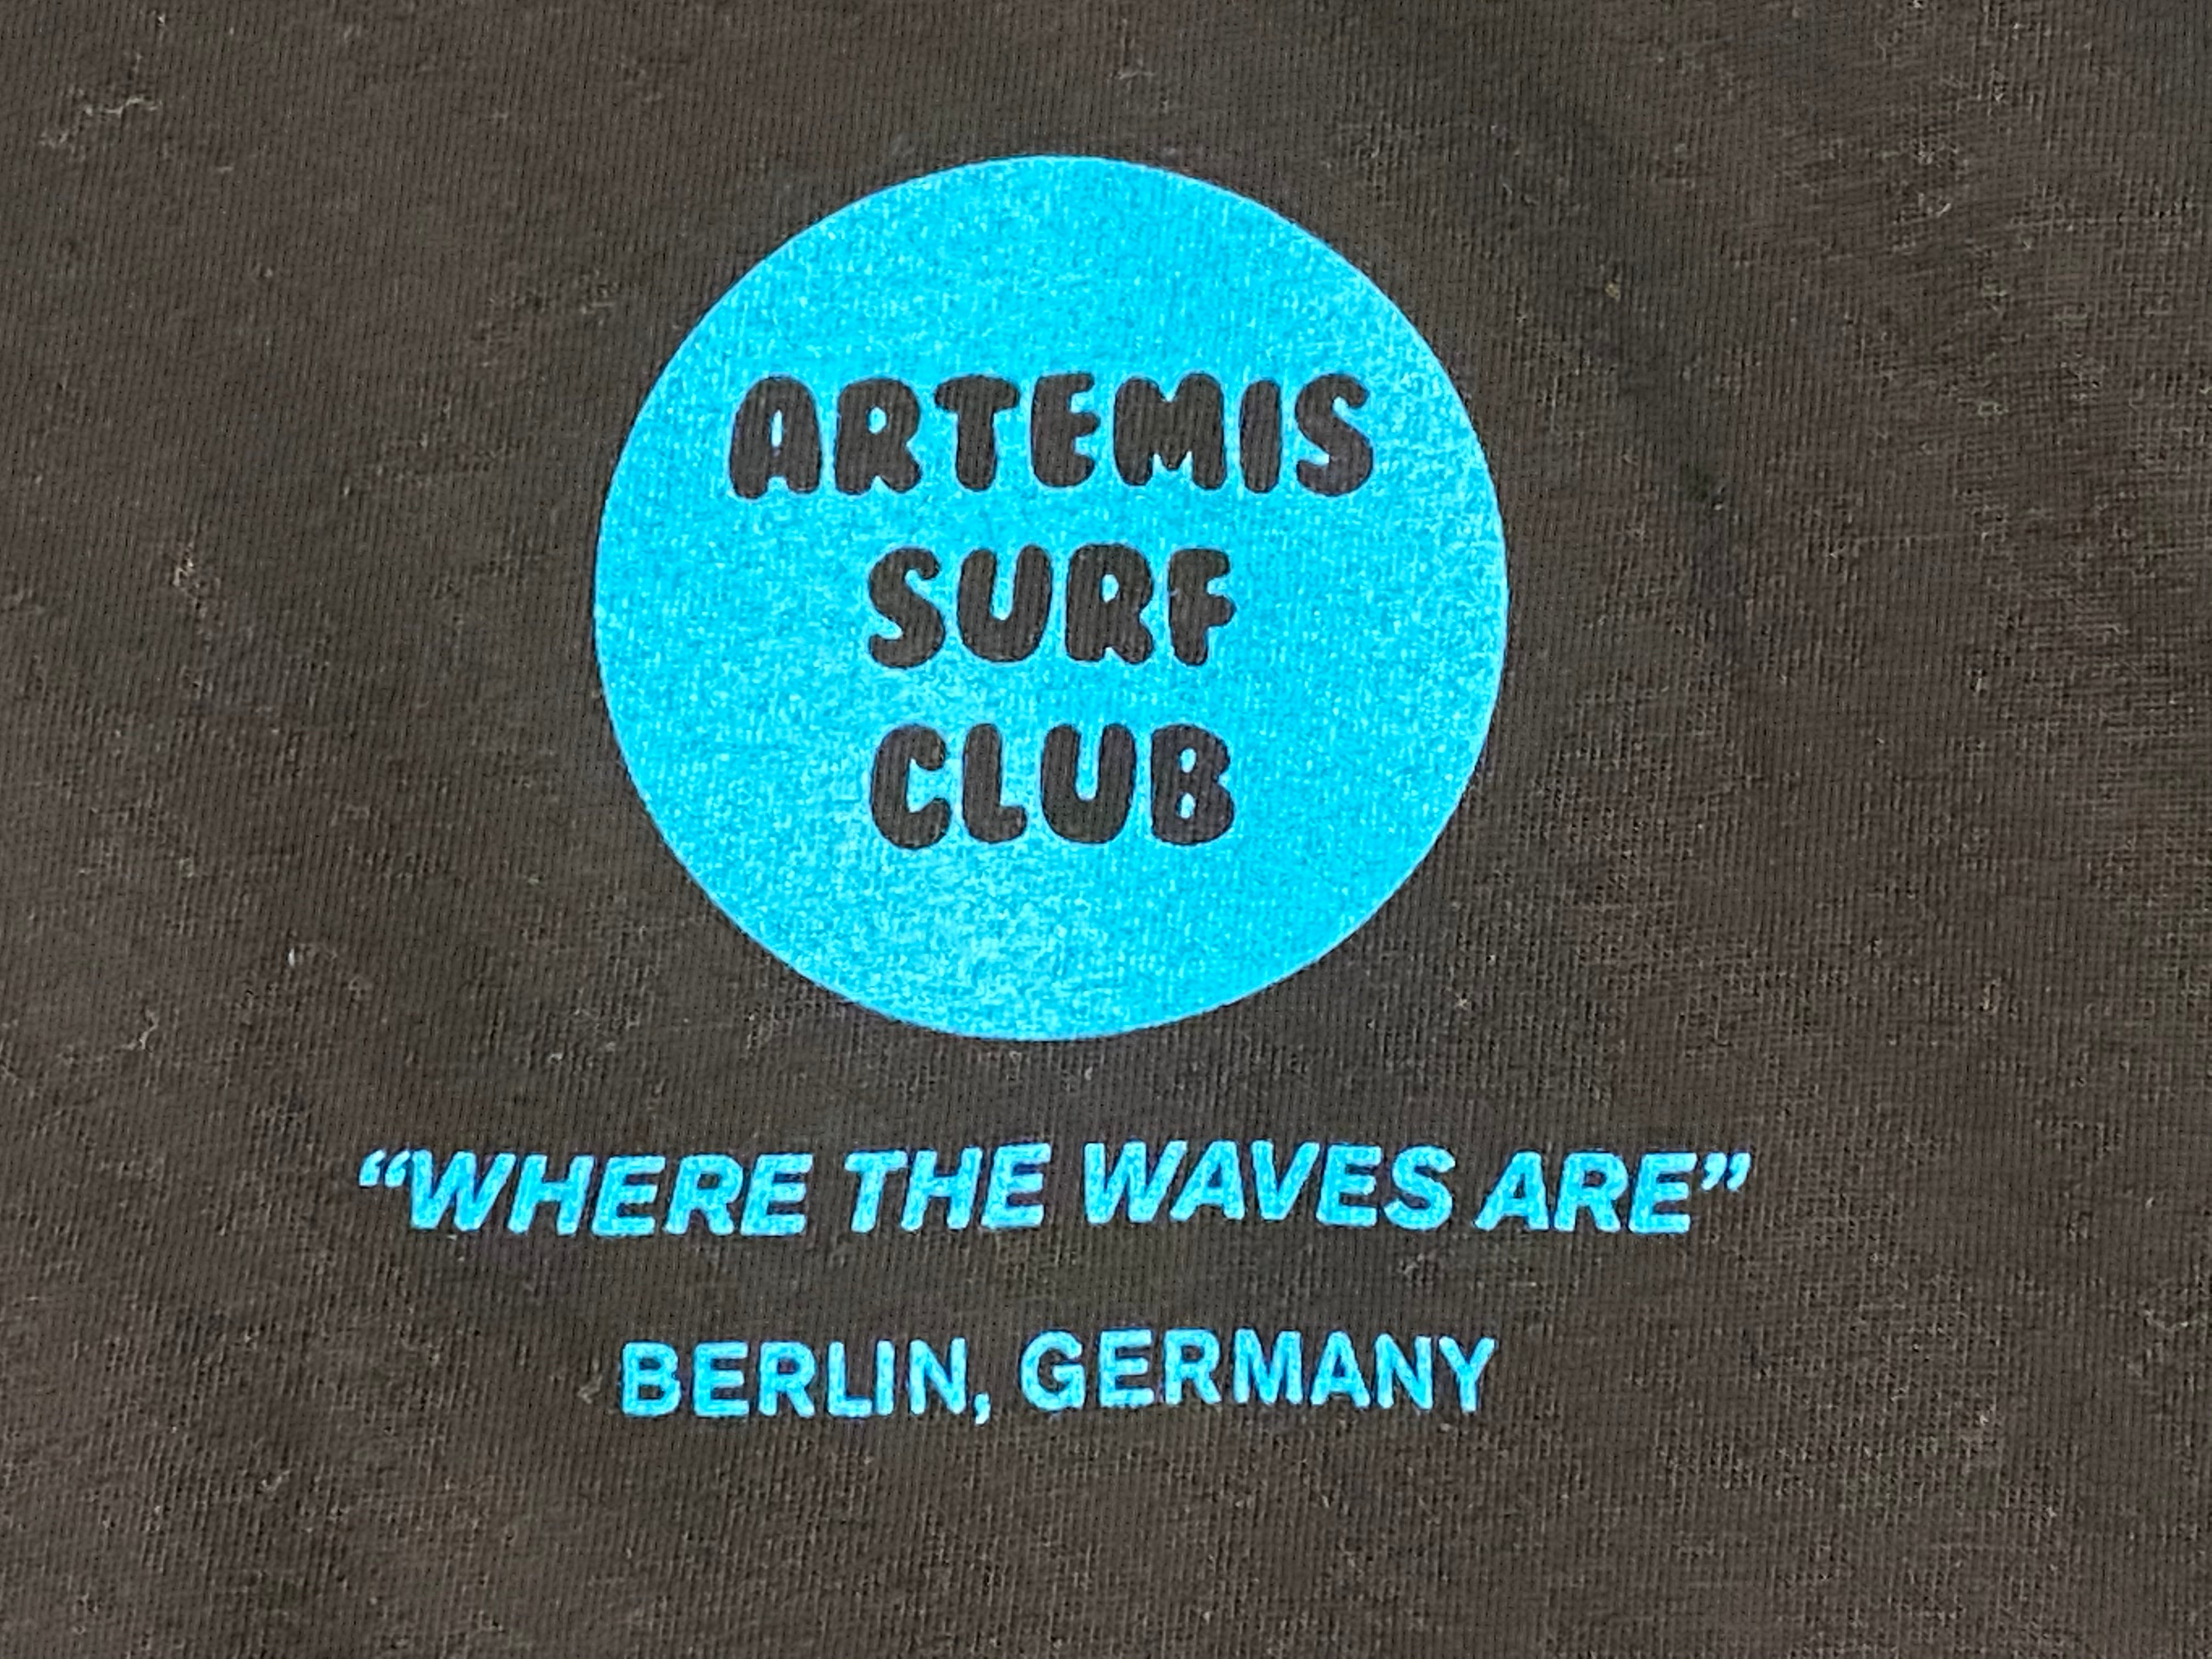 Surf is Dead Artemus Surf Club "Where the Waves Are" Berlin, Germany Tee - Black